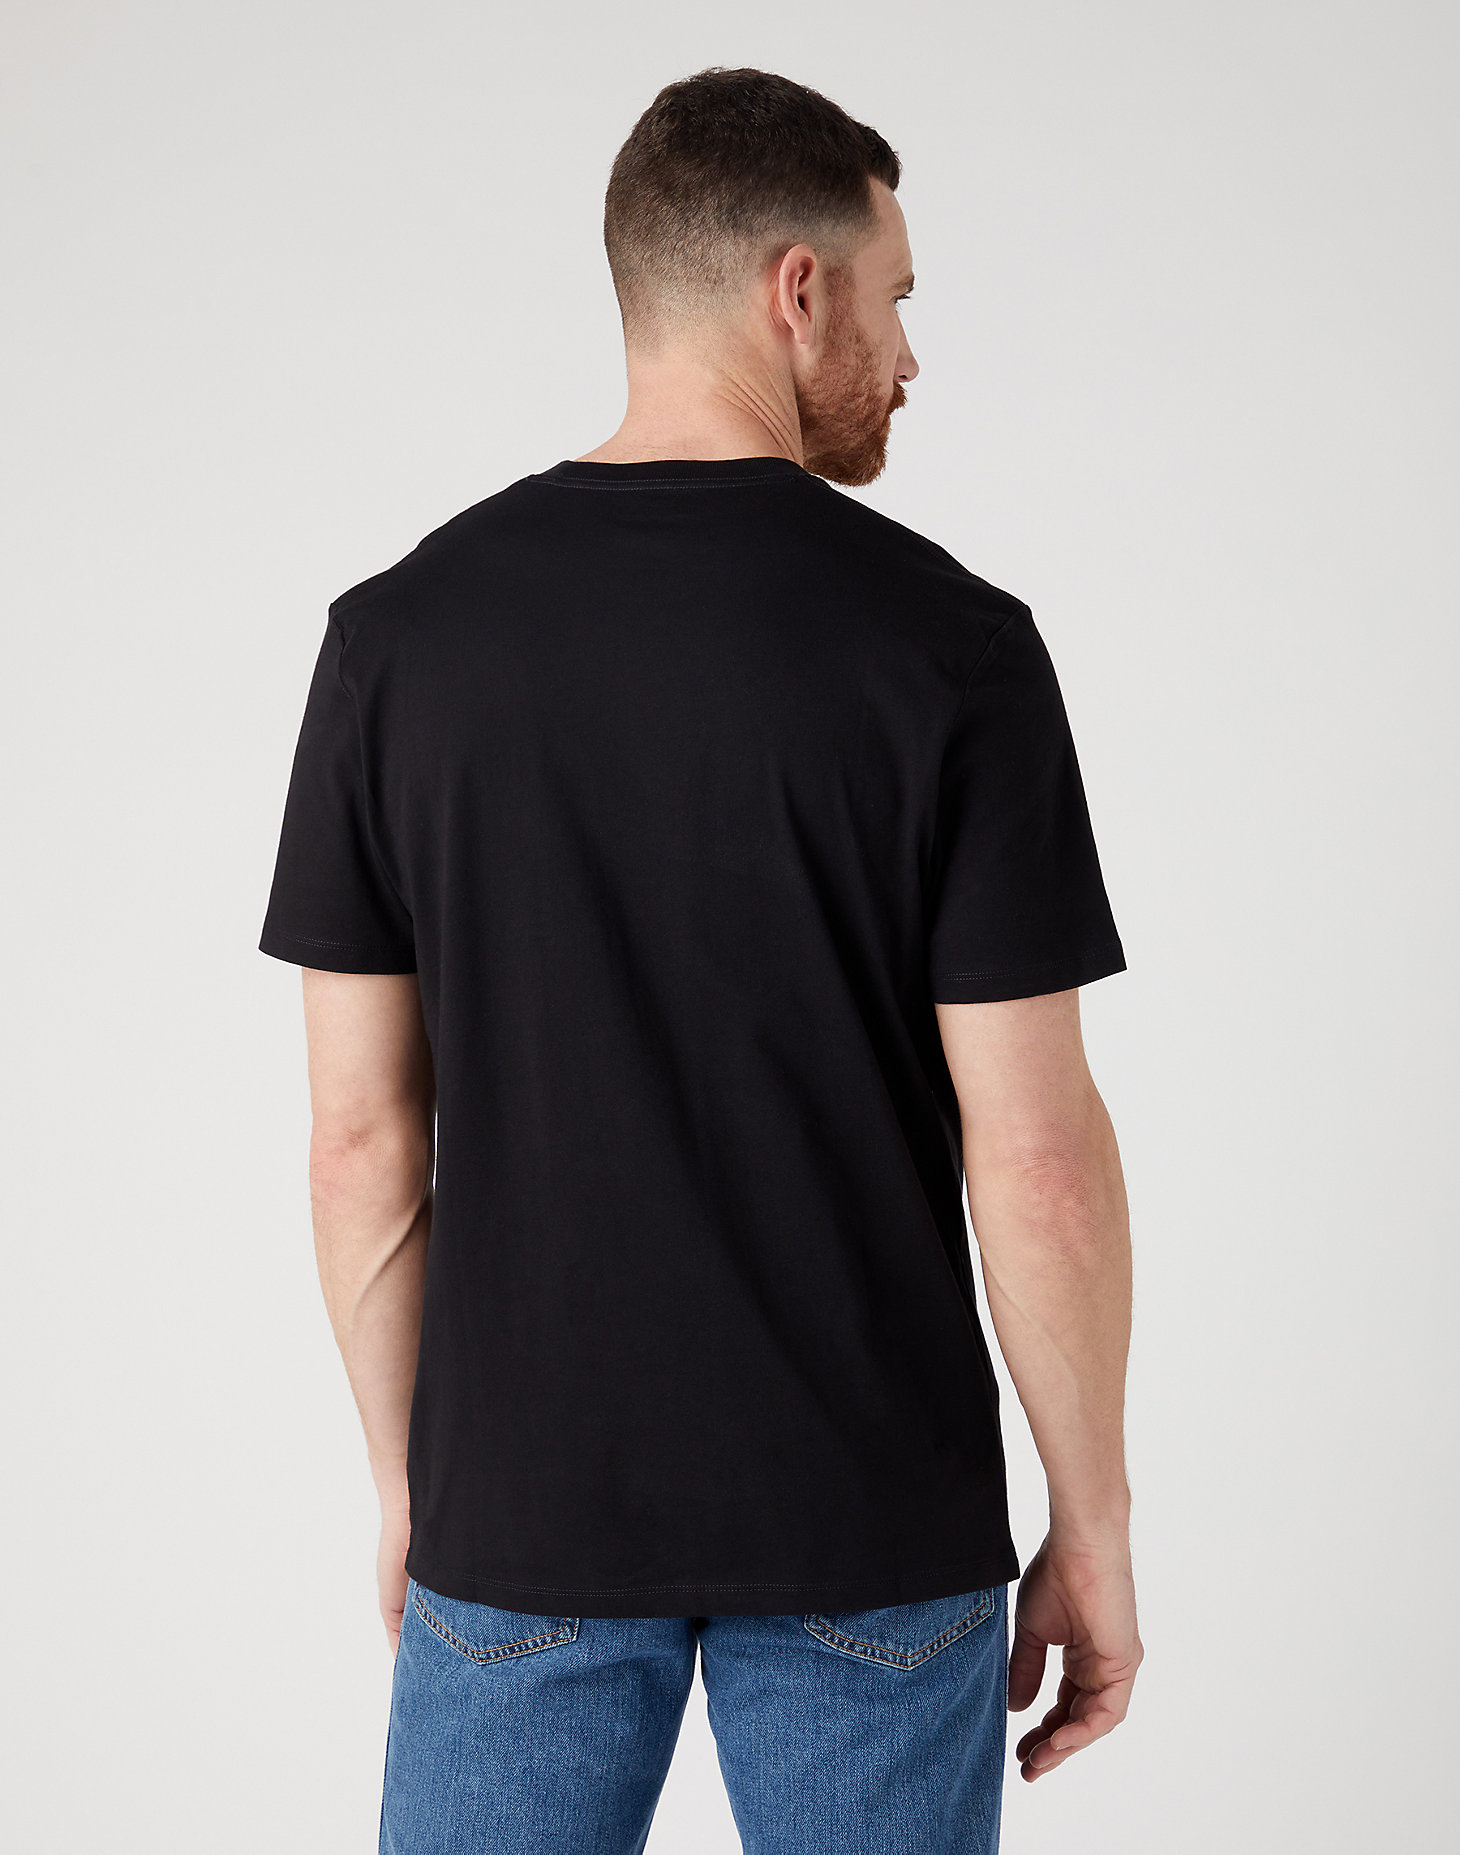 Sign Off Tee in Black alternative view 2